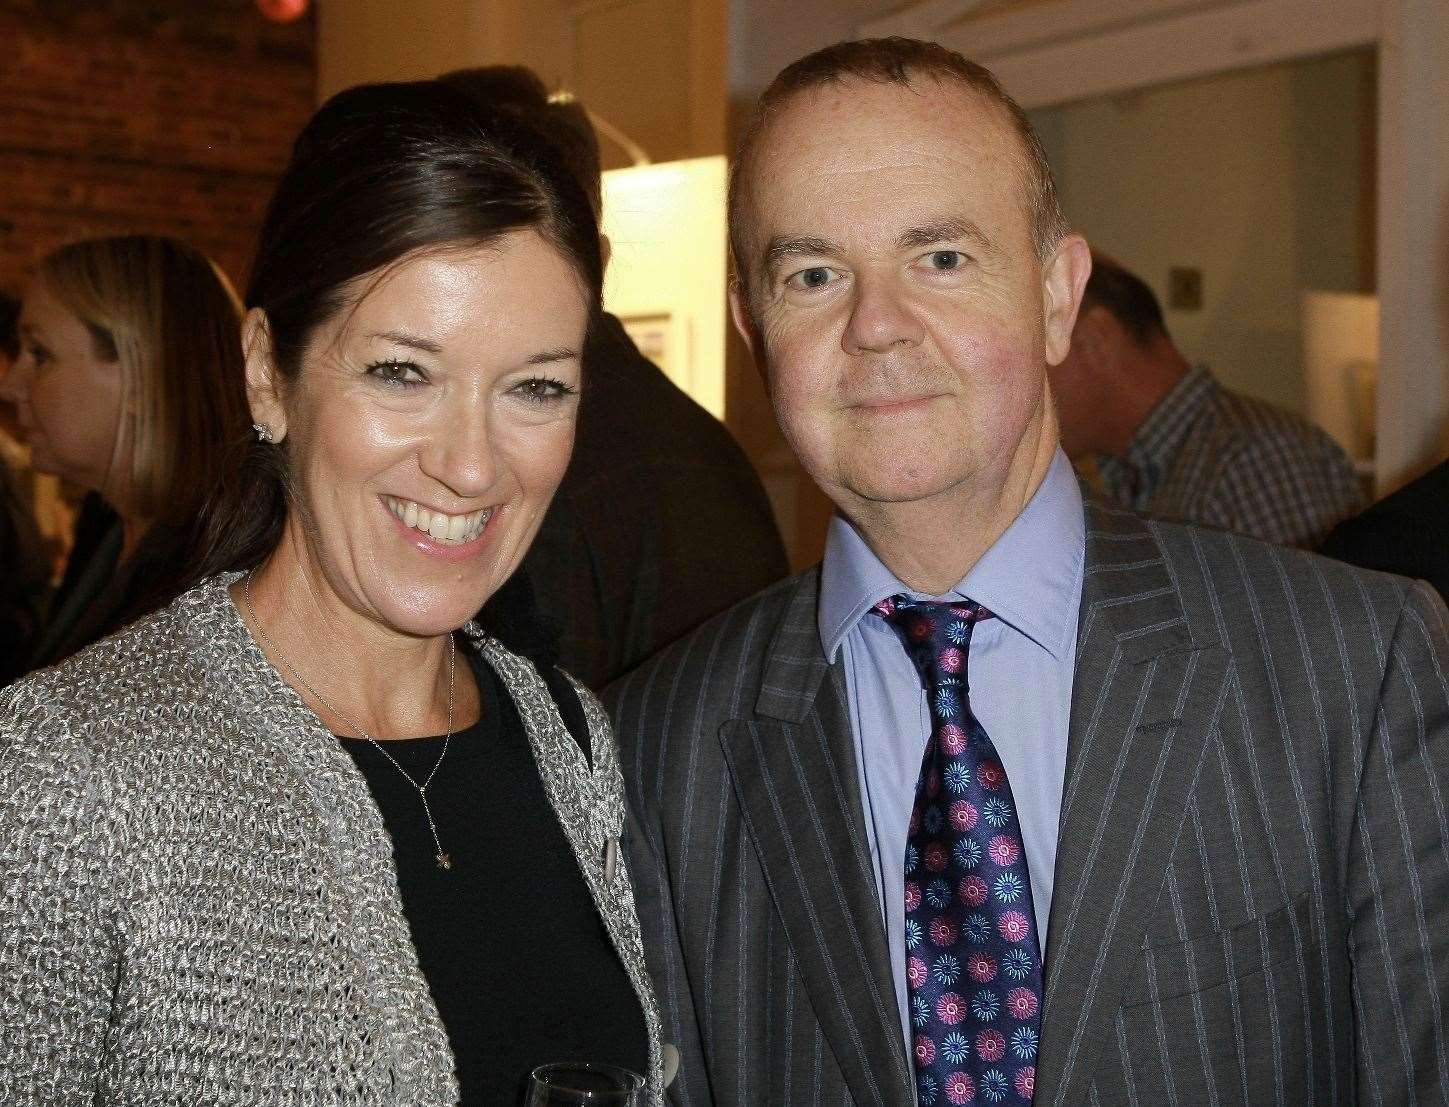 Victoria Hislop with her husband Ian in Tunbridge Wells. Picture: Grant Melton Photography ©2011